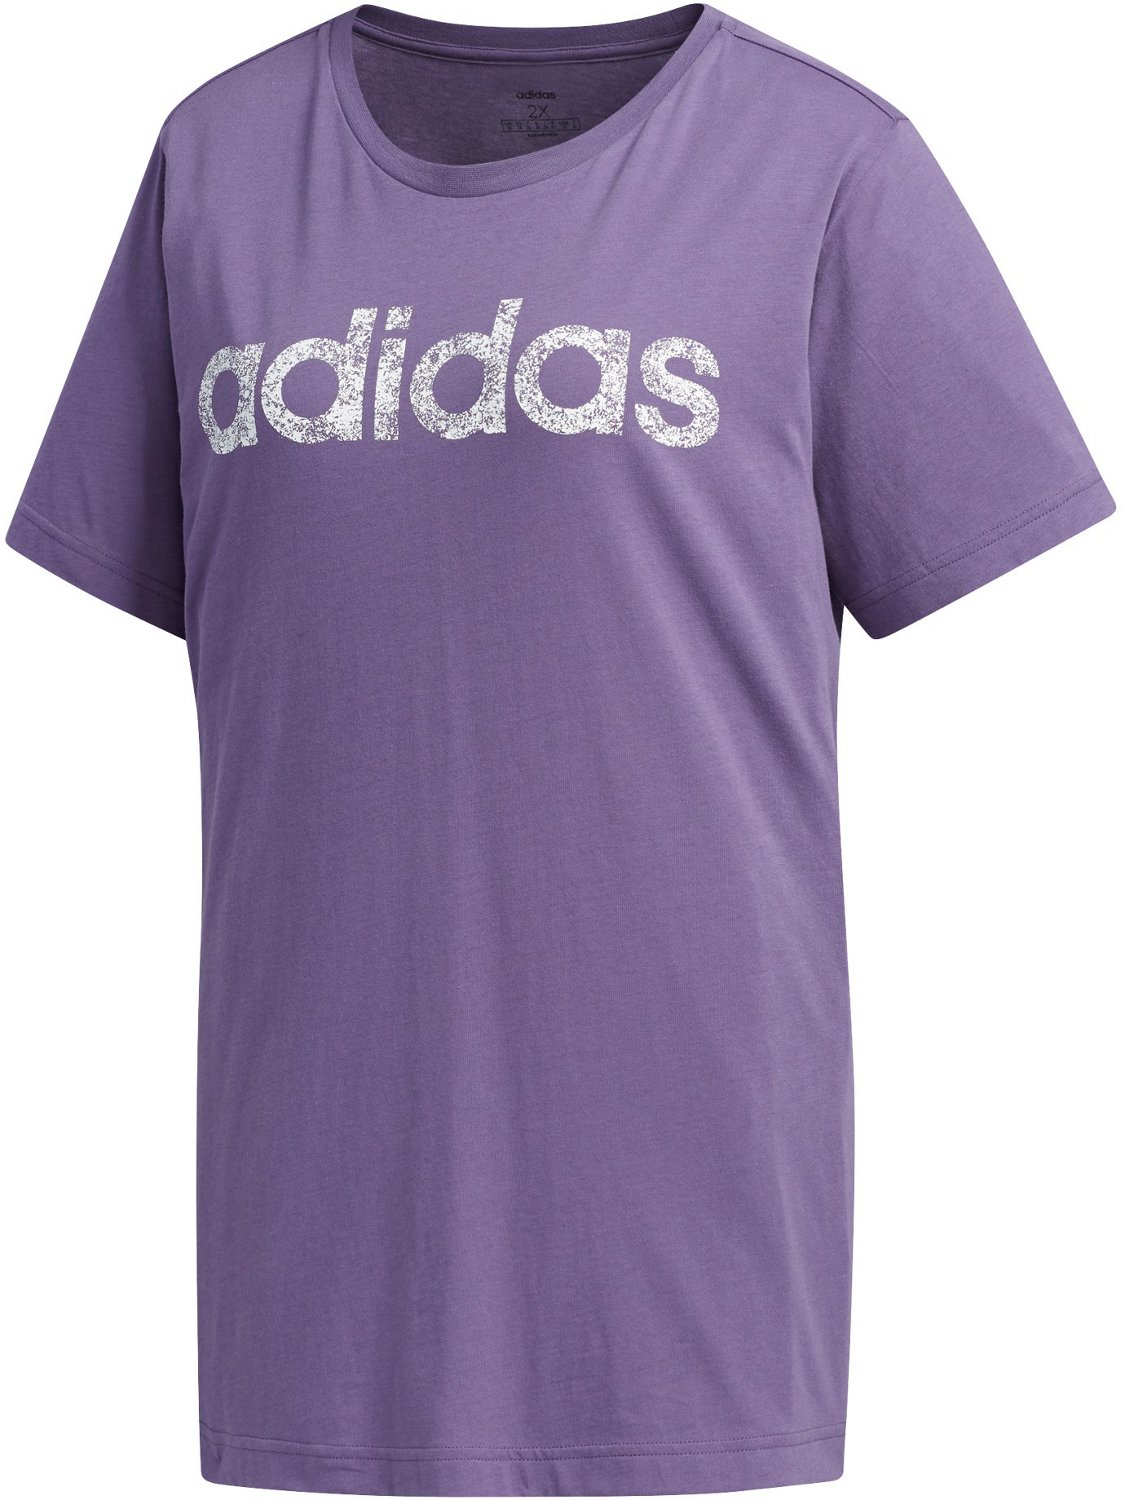 Adidasadidas Women's Essentials Plus Size T-Shirt Purple, 2X - Women's  Athletic Performance Tops at Academy Sports | DailyMail